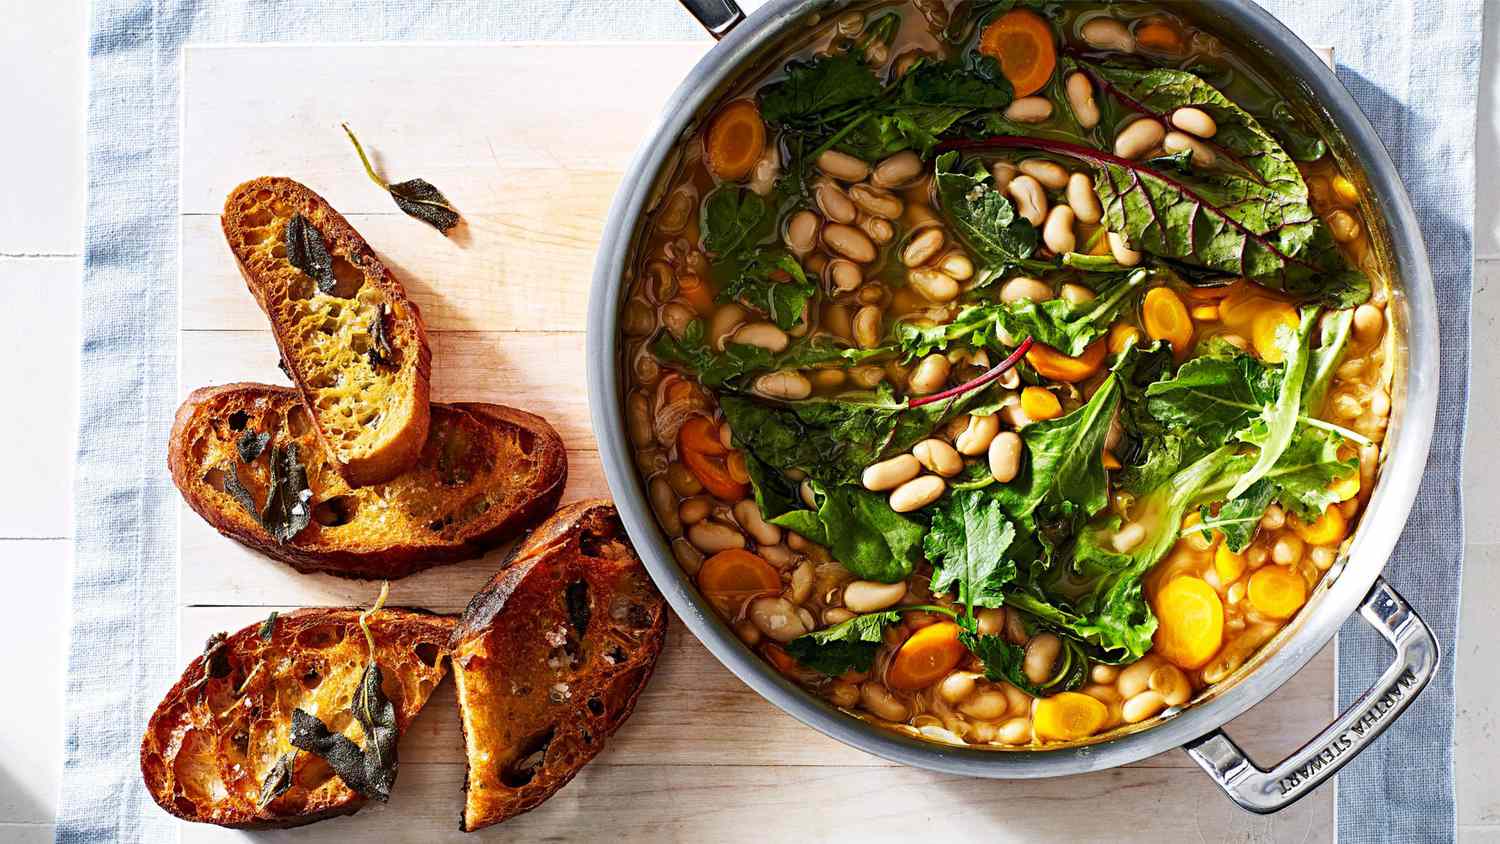 Our Food Editor's Favorite One-Pot Recipes | Martha Stewart